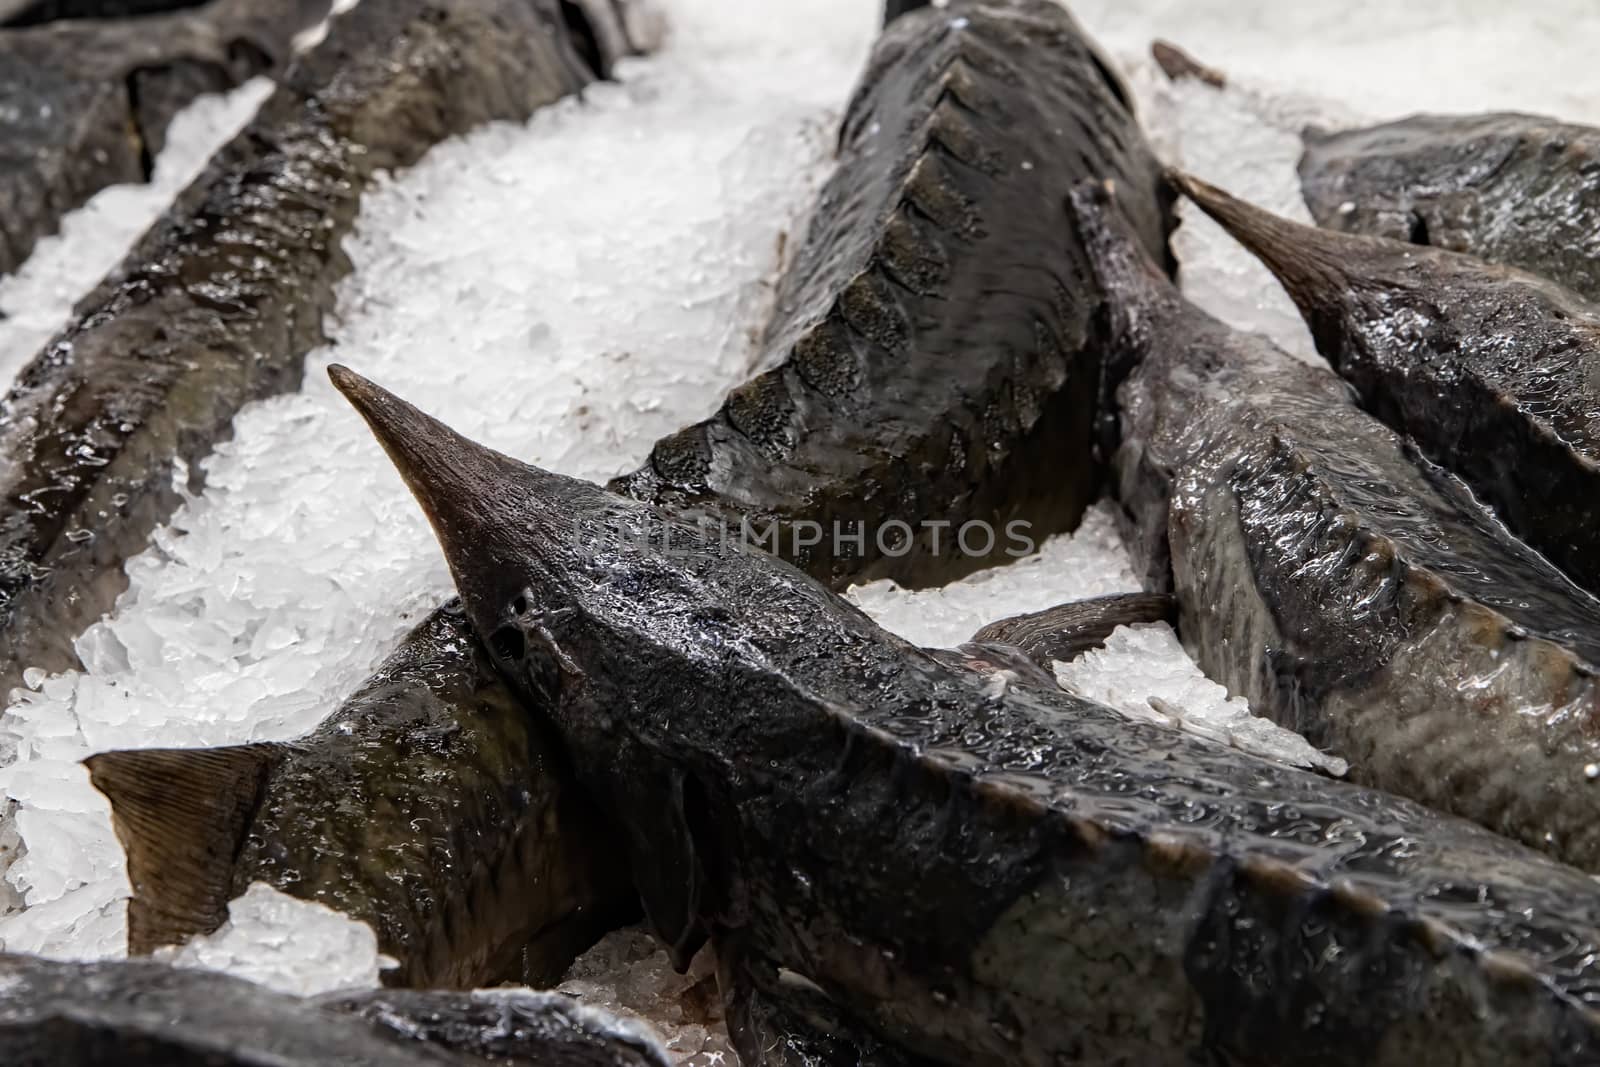 Fish exposed in fish market for sale to the consumer by bonilook